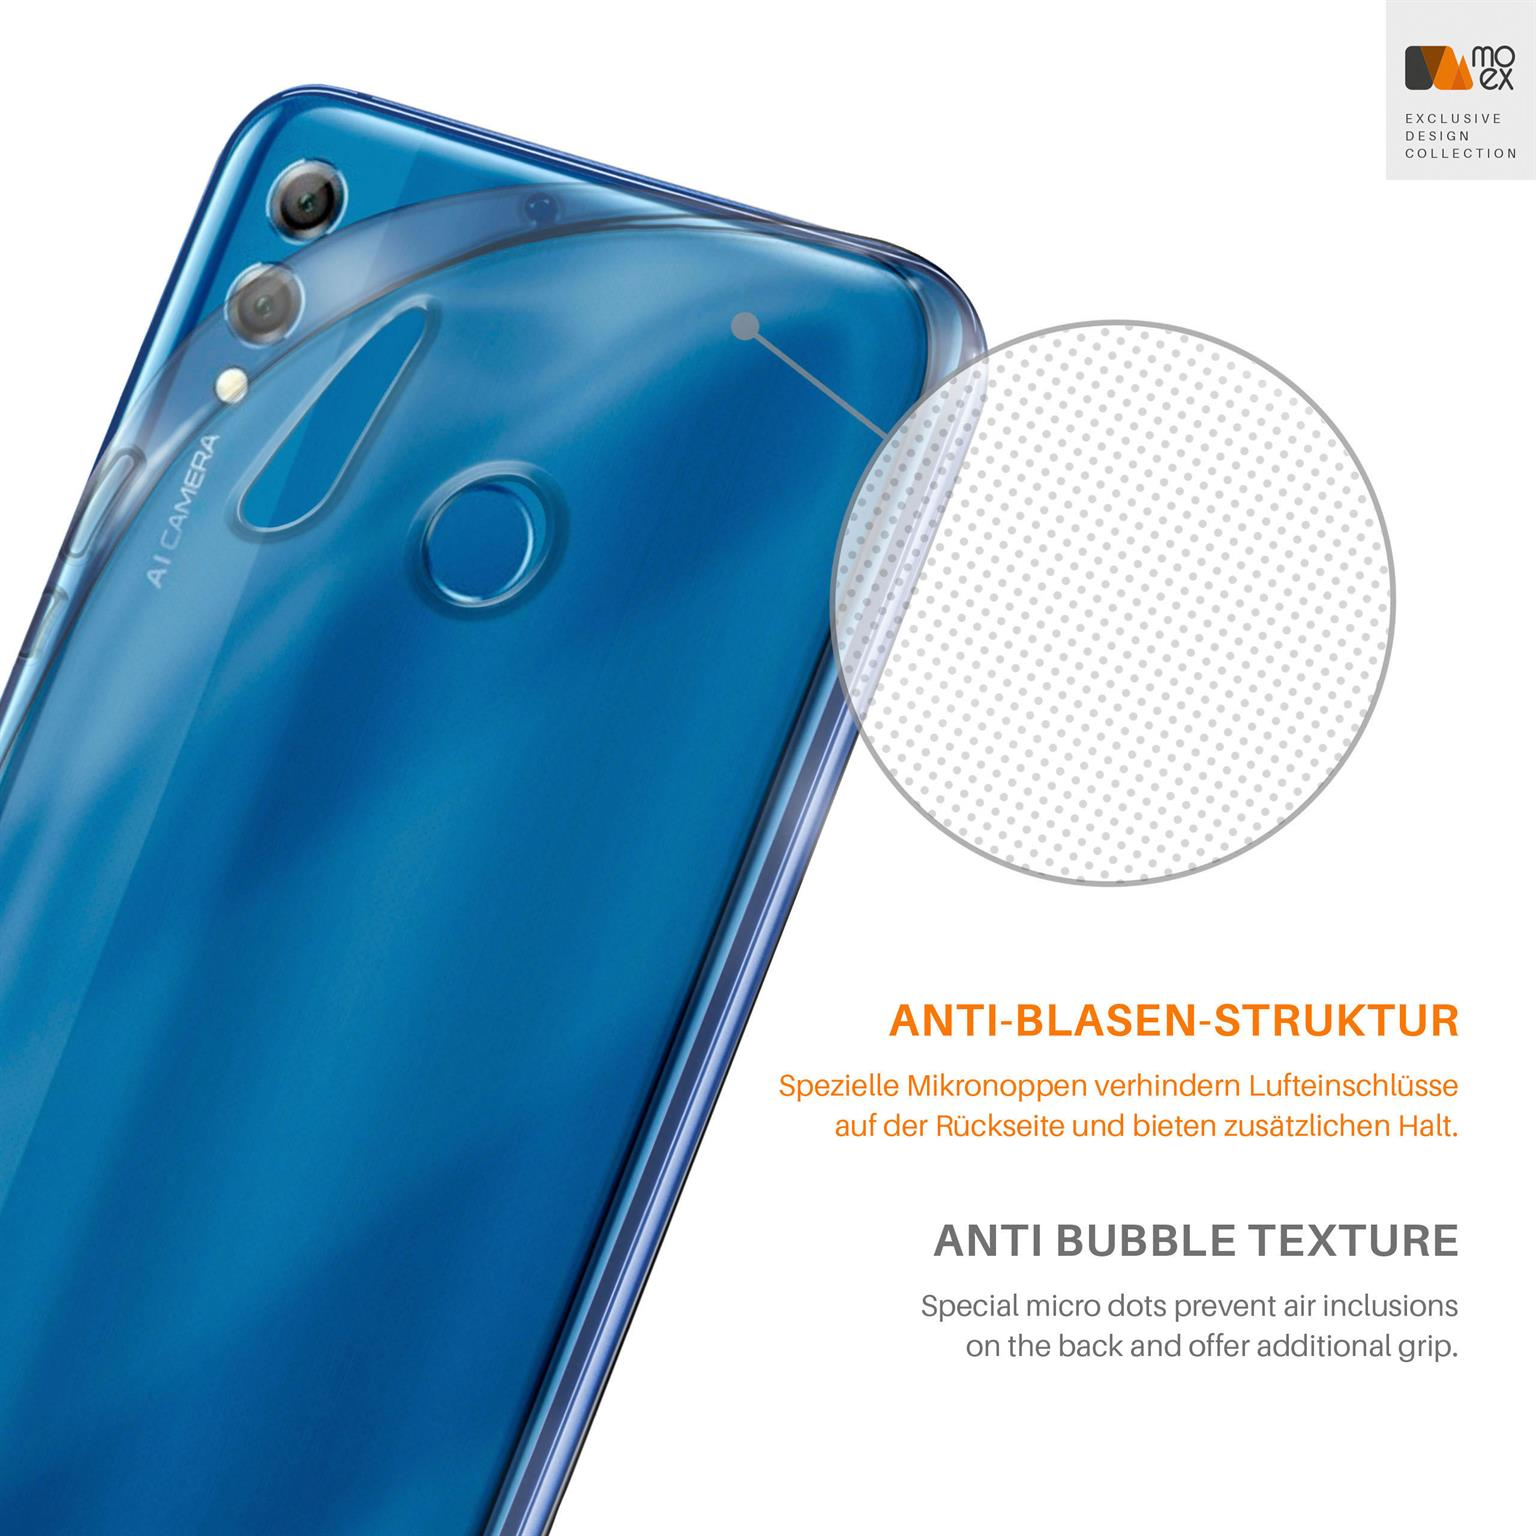 MOEX Aero Case, Backcover, Huawei, Crystal-Clear Honor 8X Max